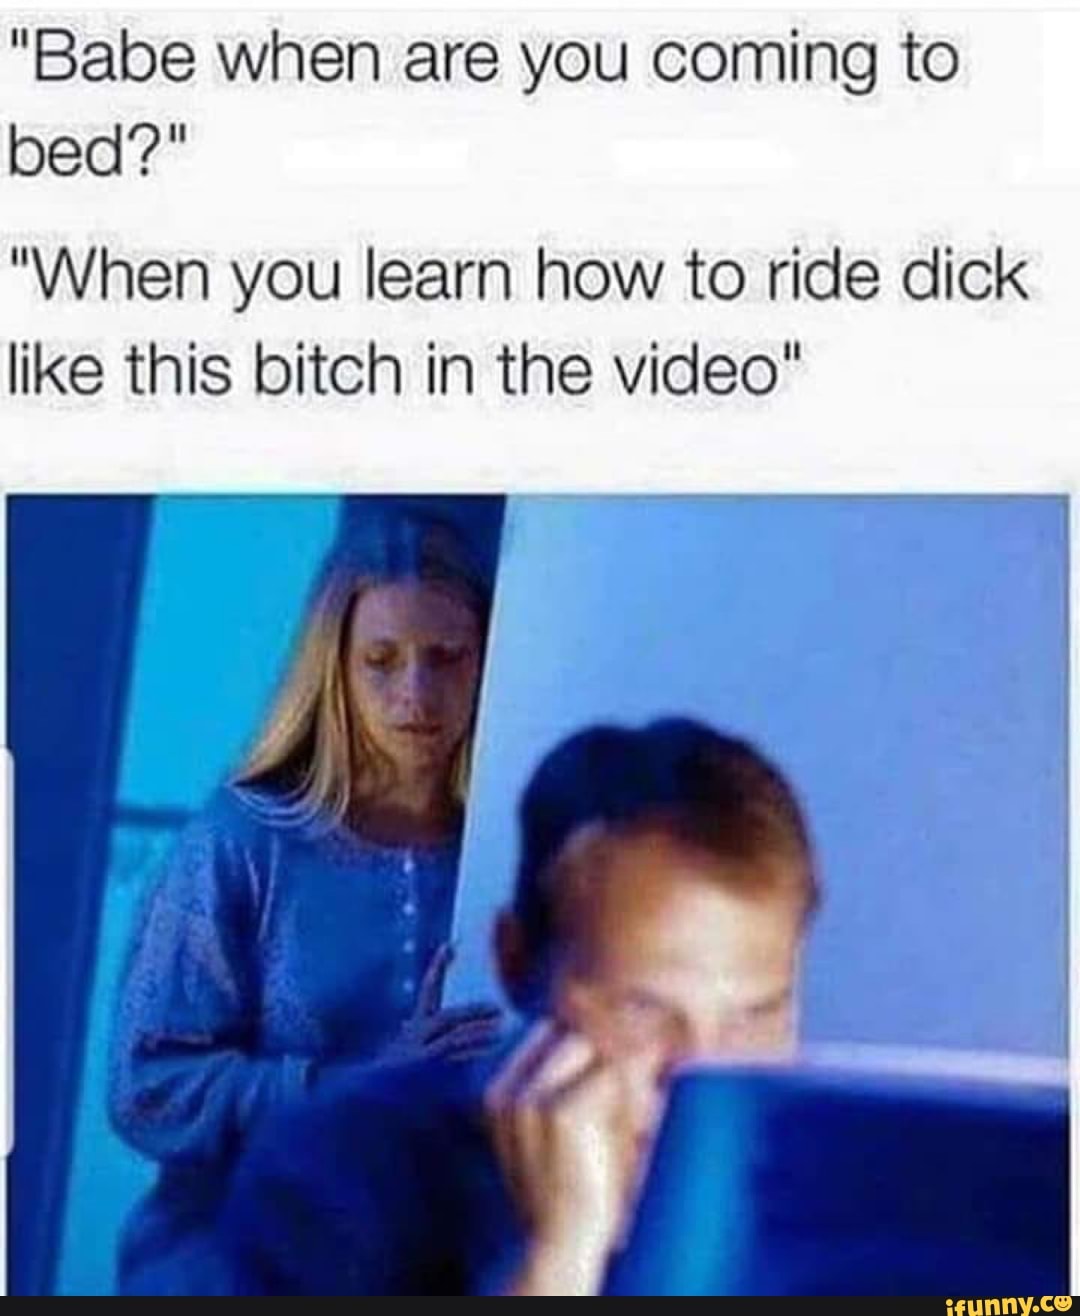 Learning how to ride dick